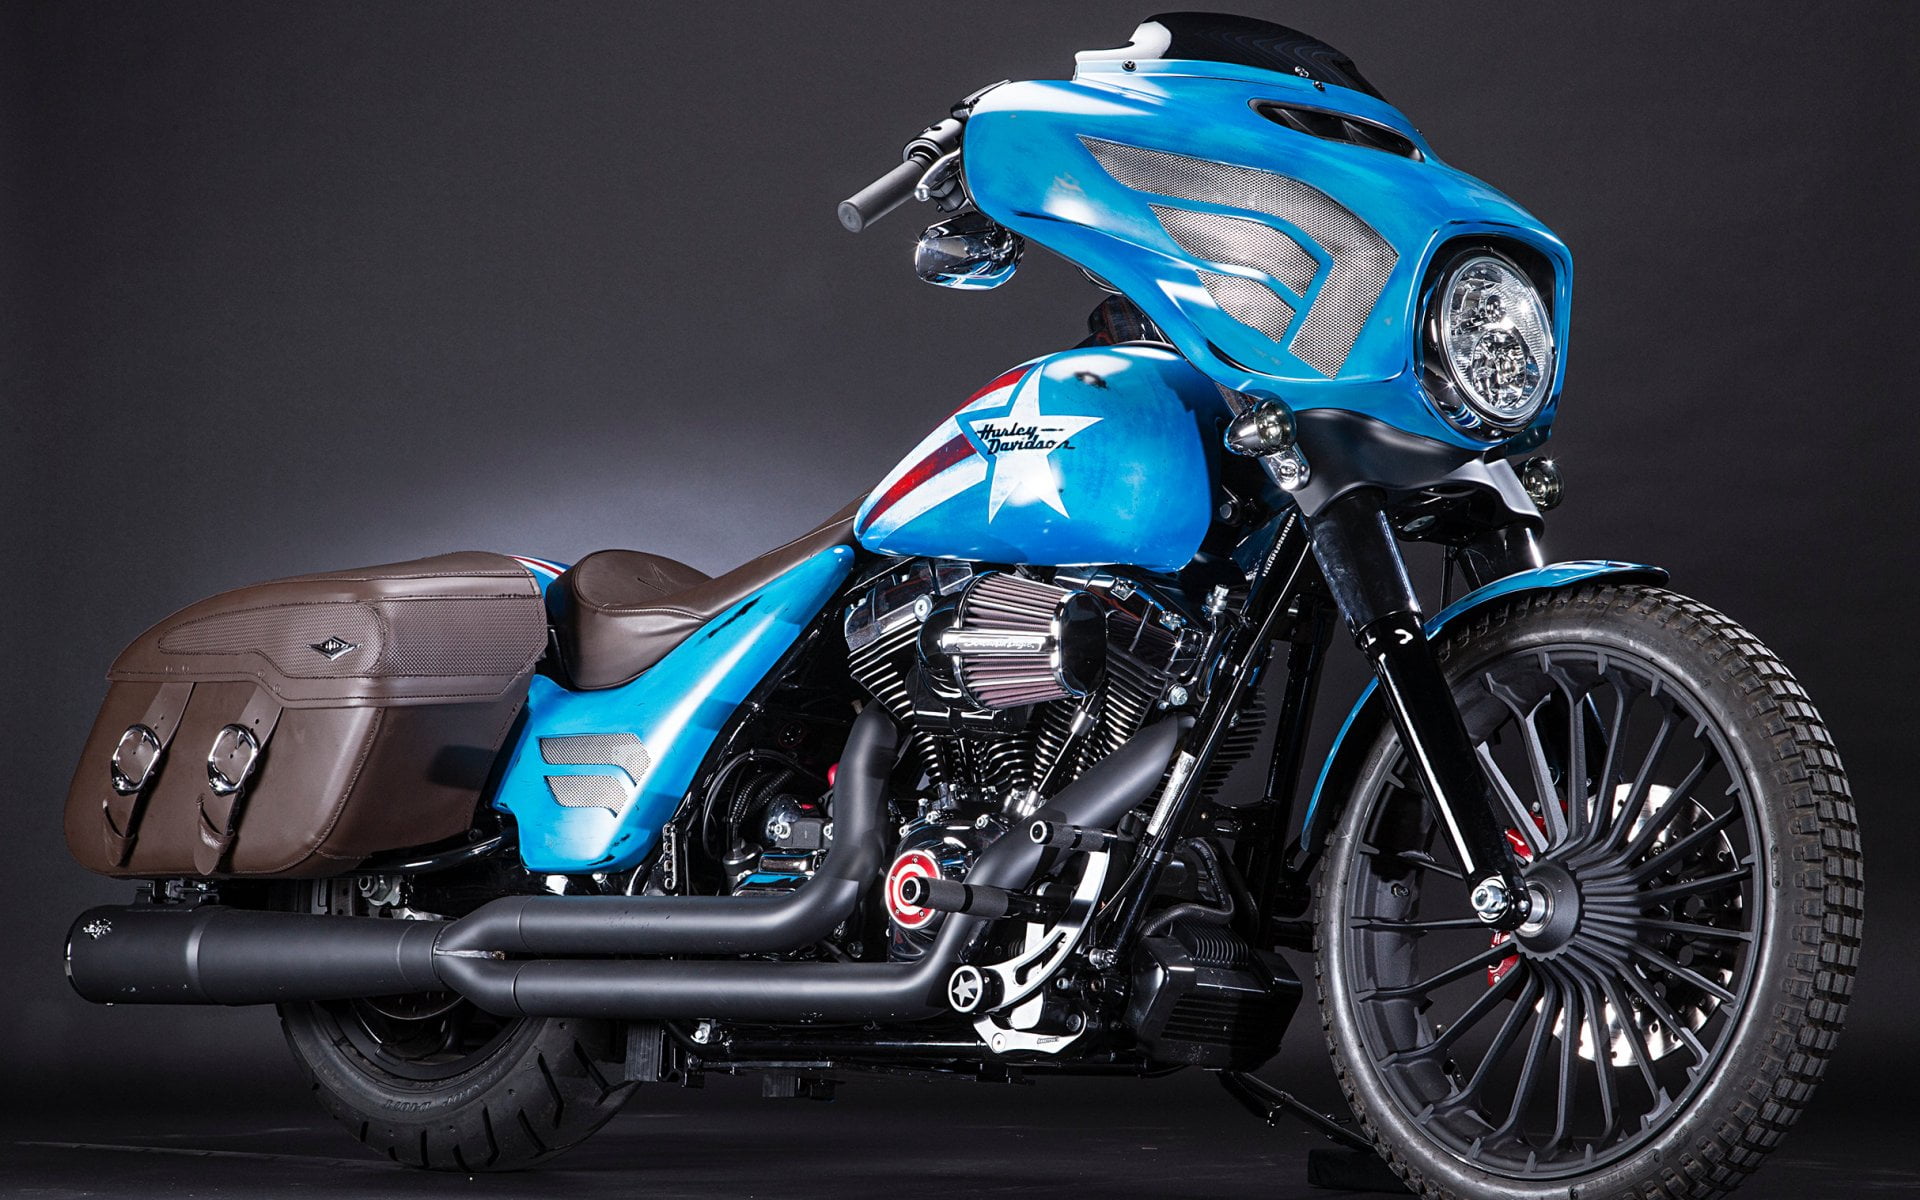 Captain America Street Glide Special, blue and black touring motorcycle